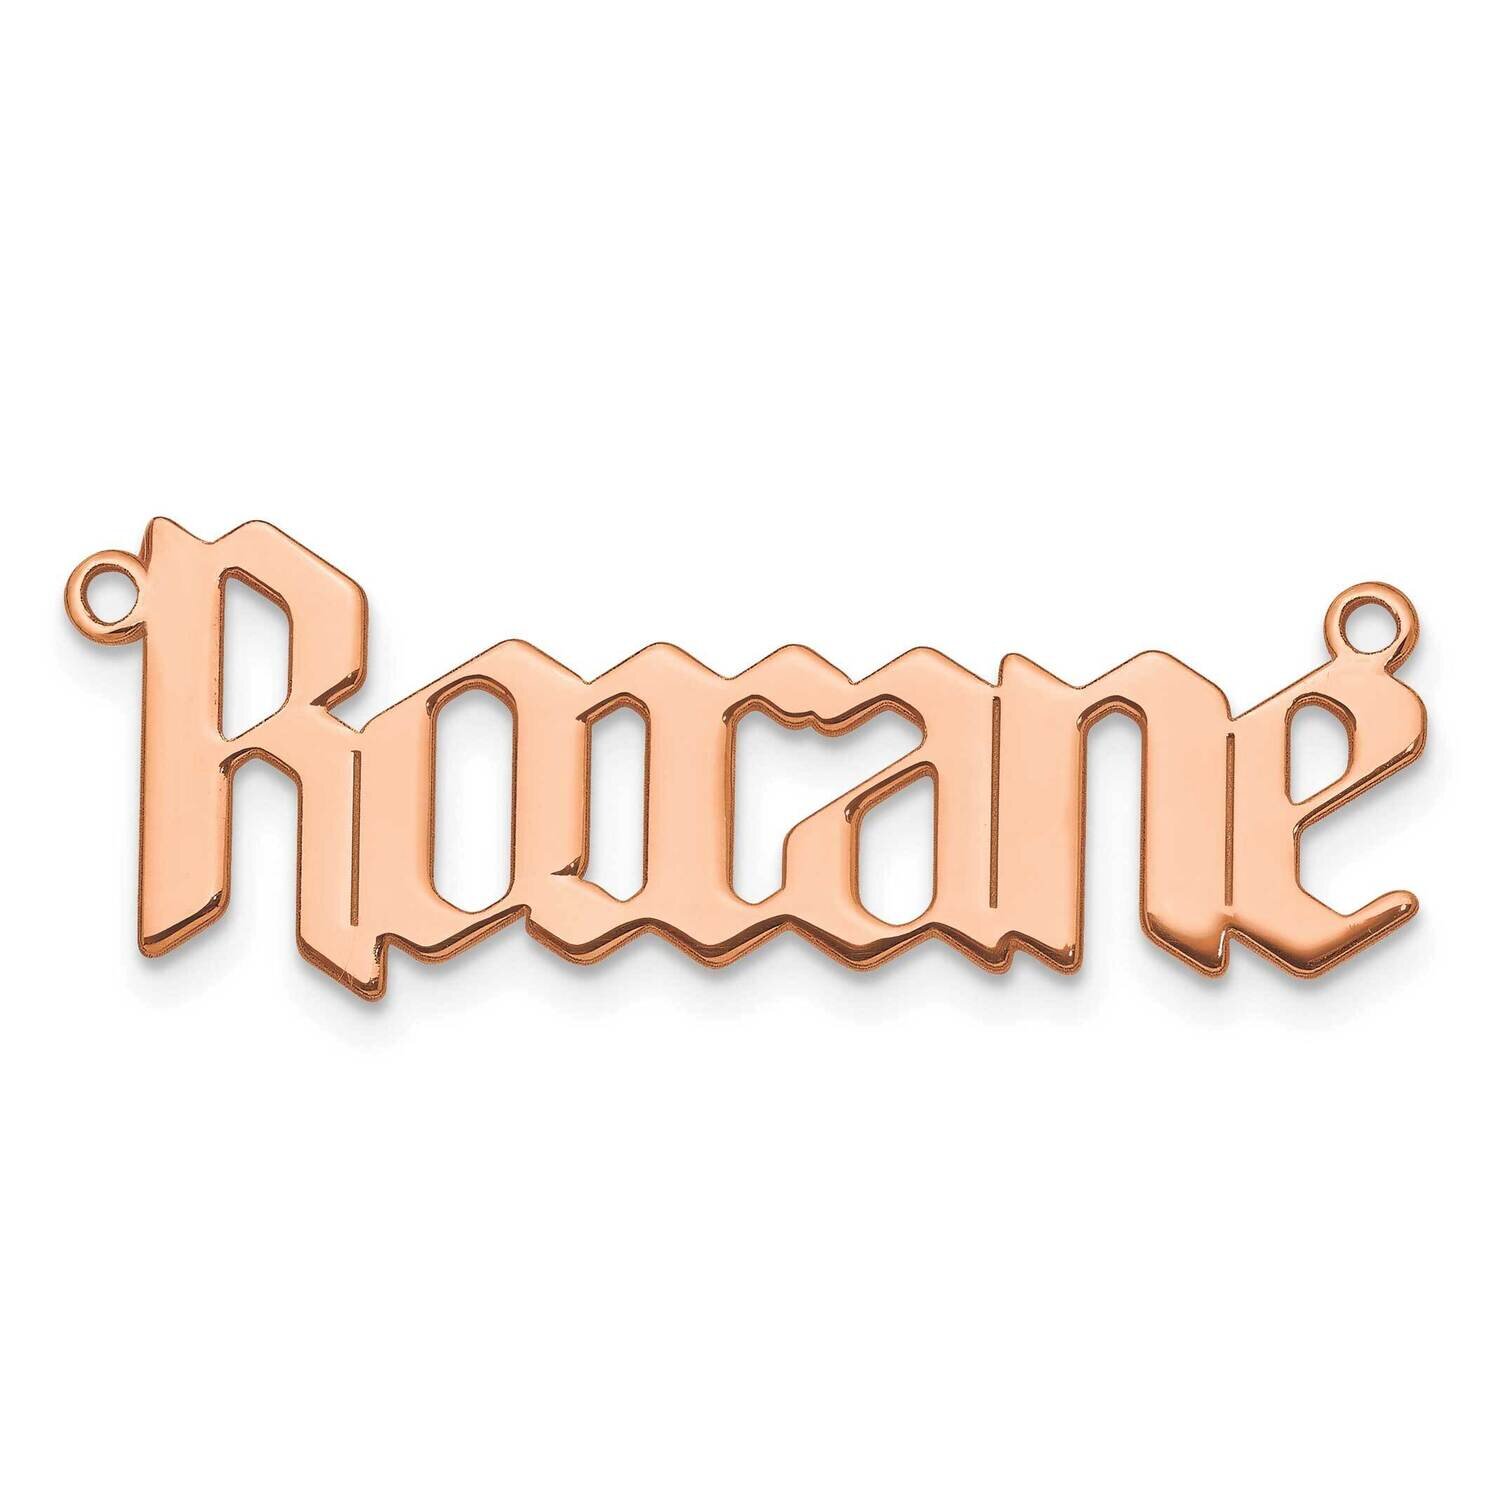 New Gothic Textura Font Name Plate 14k Rose Gold Polished XNA1298R